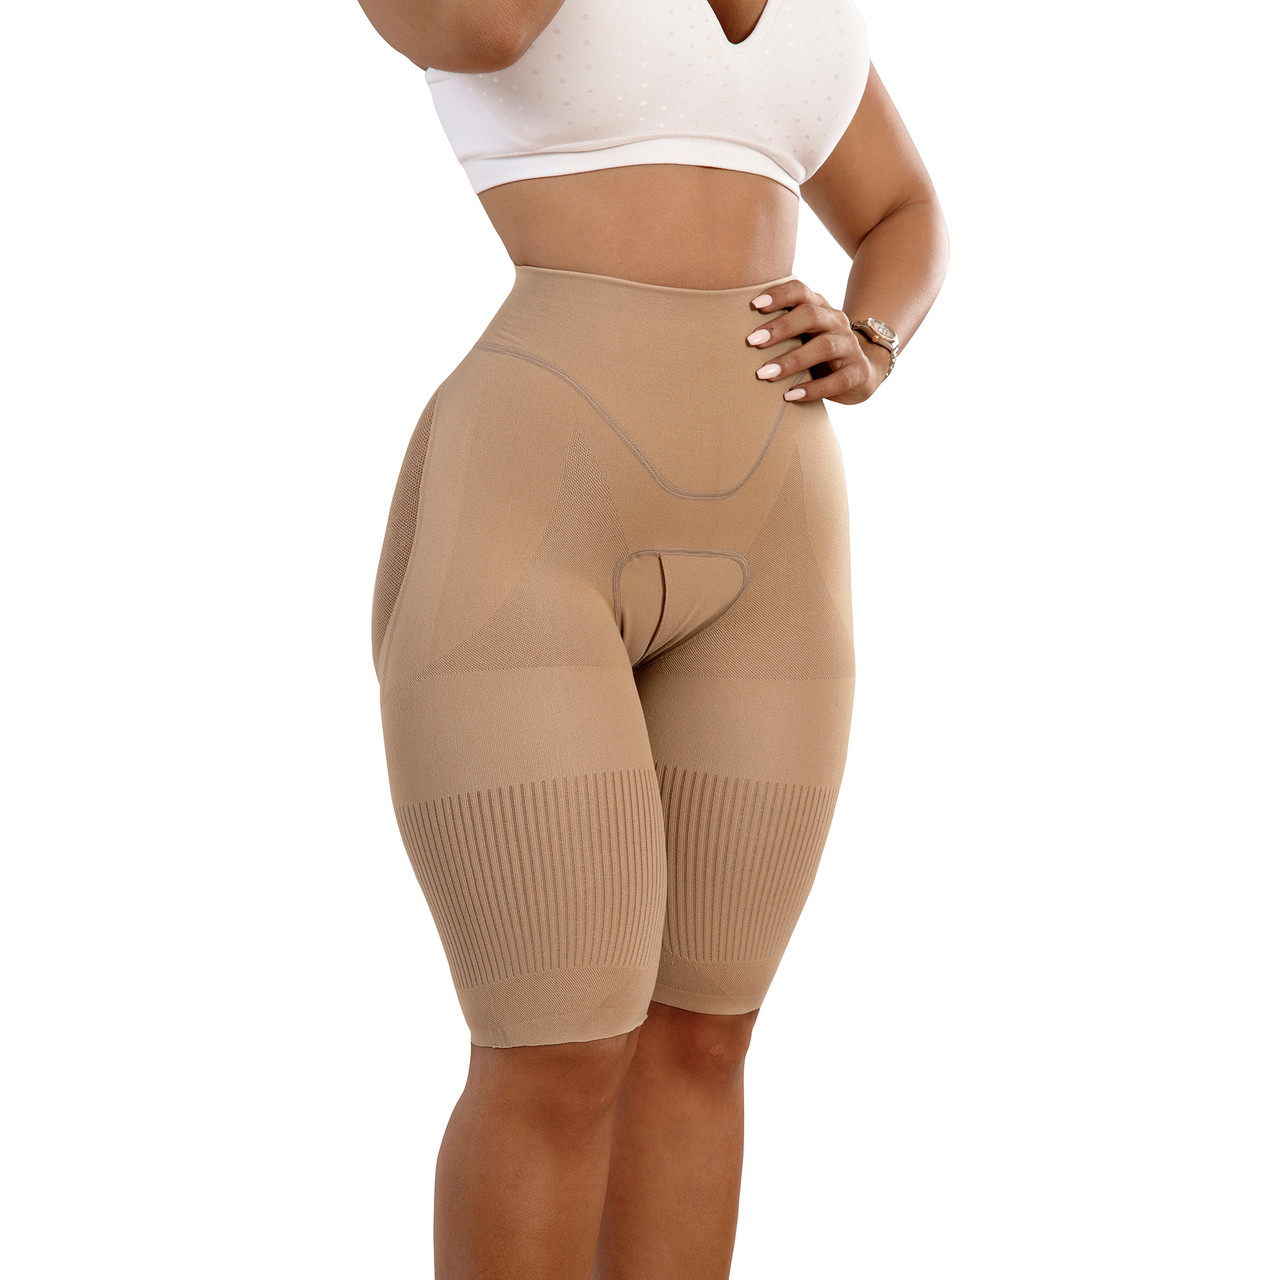 Shop Yahaira - 🍑Happy Butt No.7 body shaper shapes your body overtime! I  was always looking for the perfect body shaper but they were so  uncomfortable and noticeable so I decided to